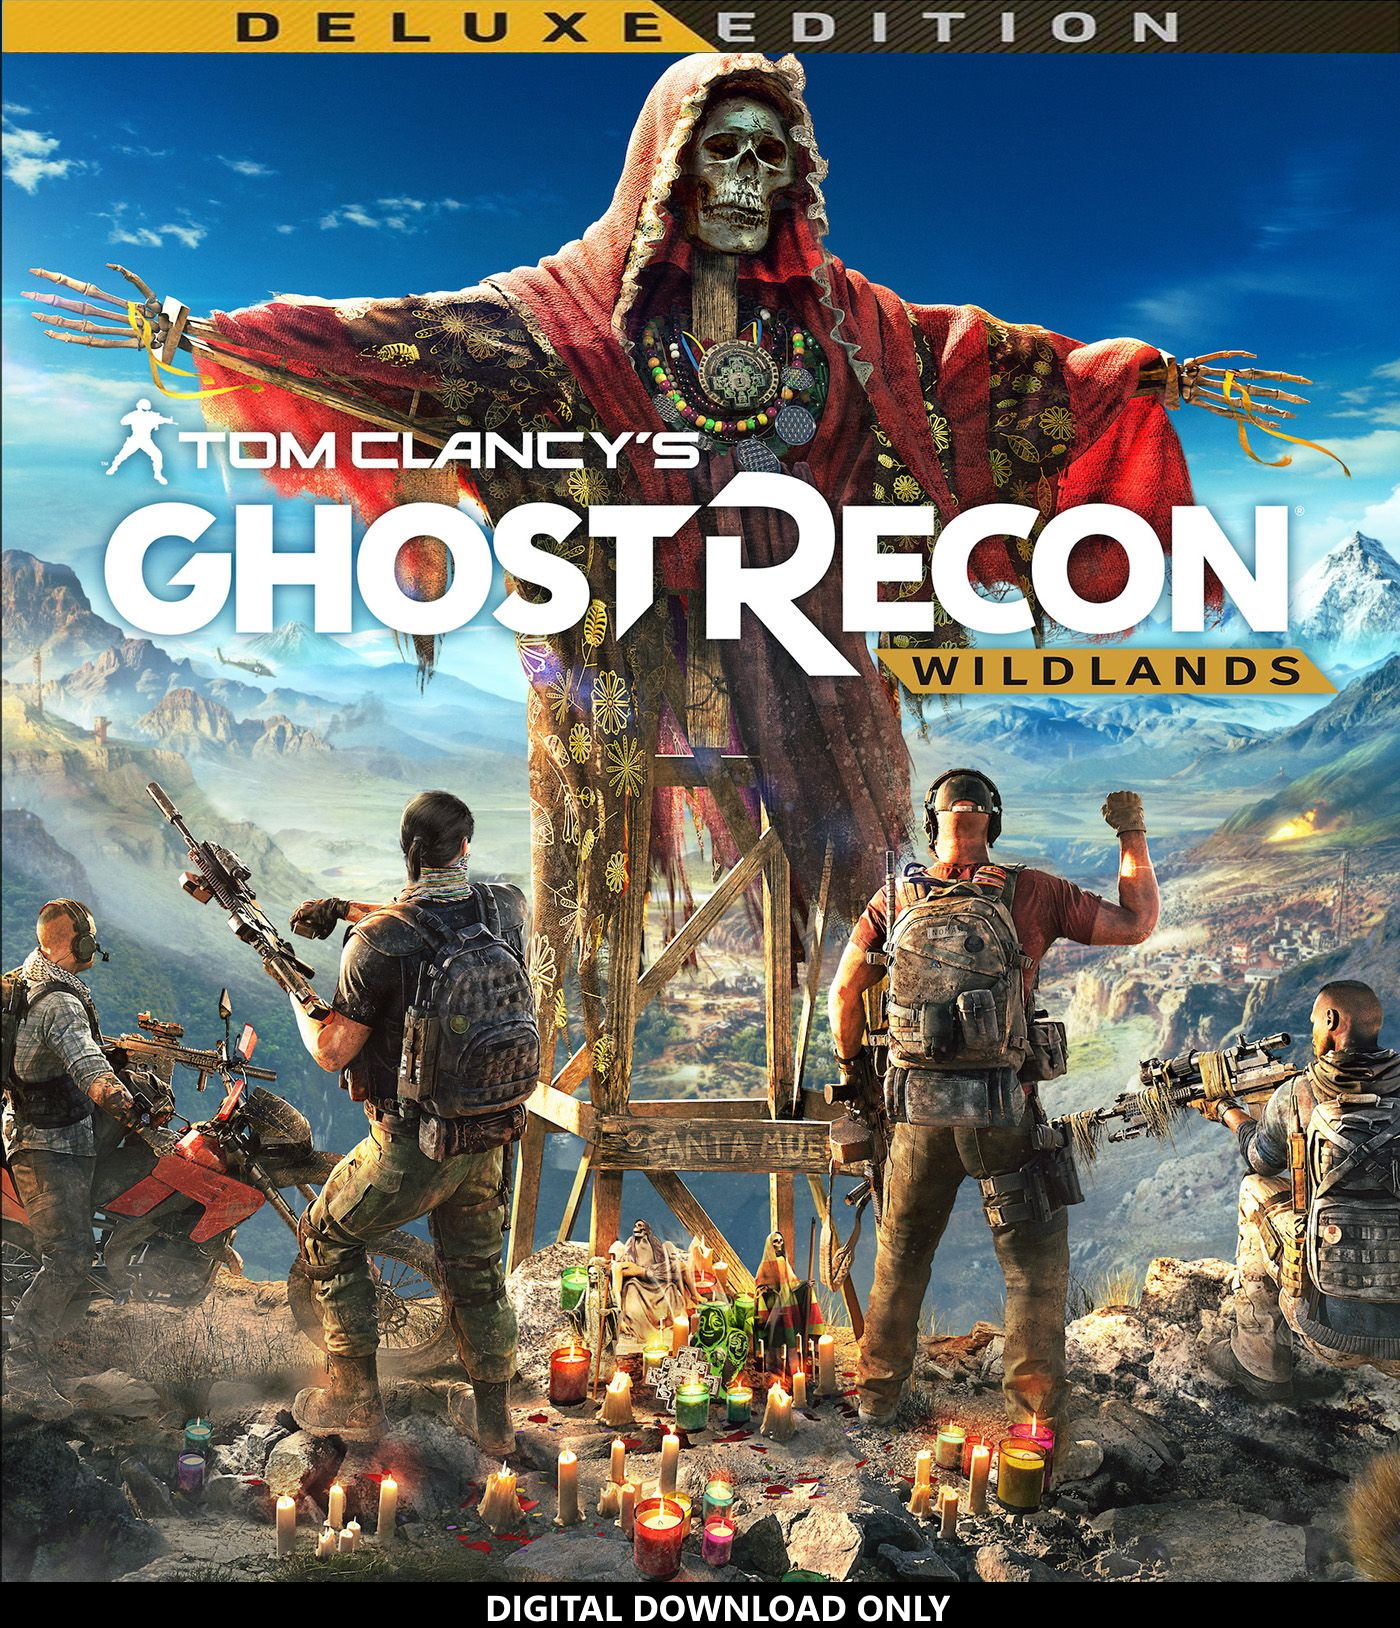 Tom Clancy S Ghost Recon Wildlands Deluxe Edition Touchstone Bros Digital Game Store